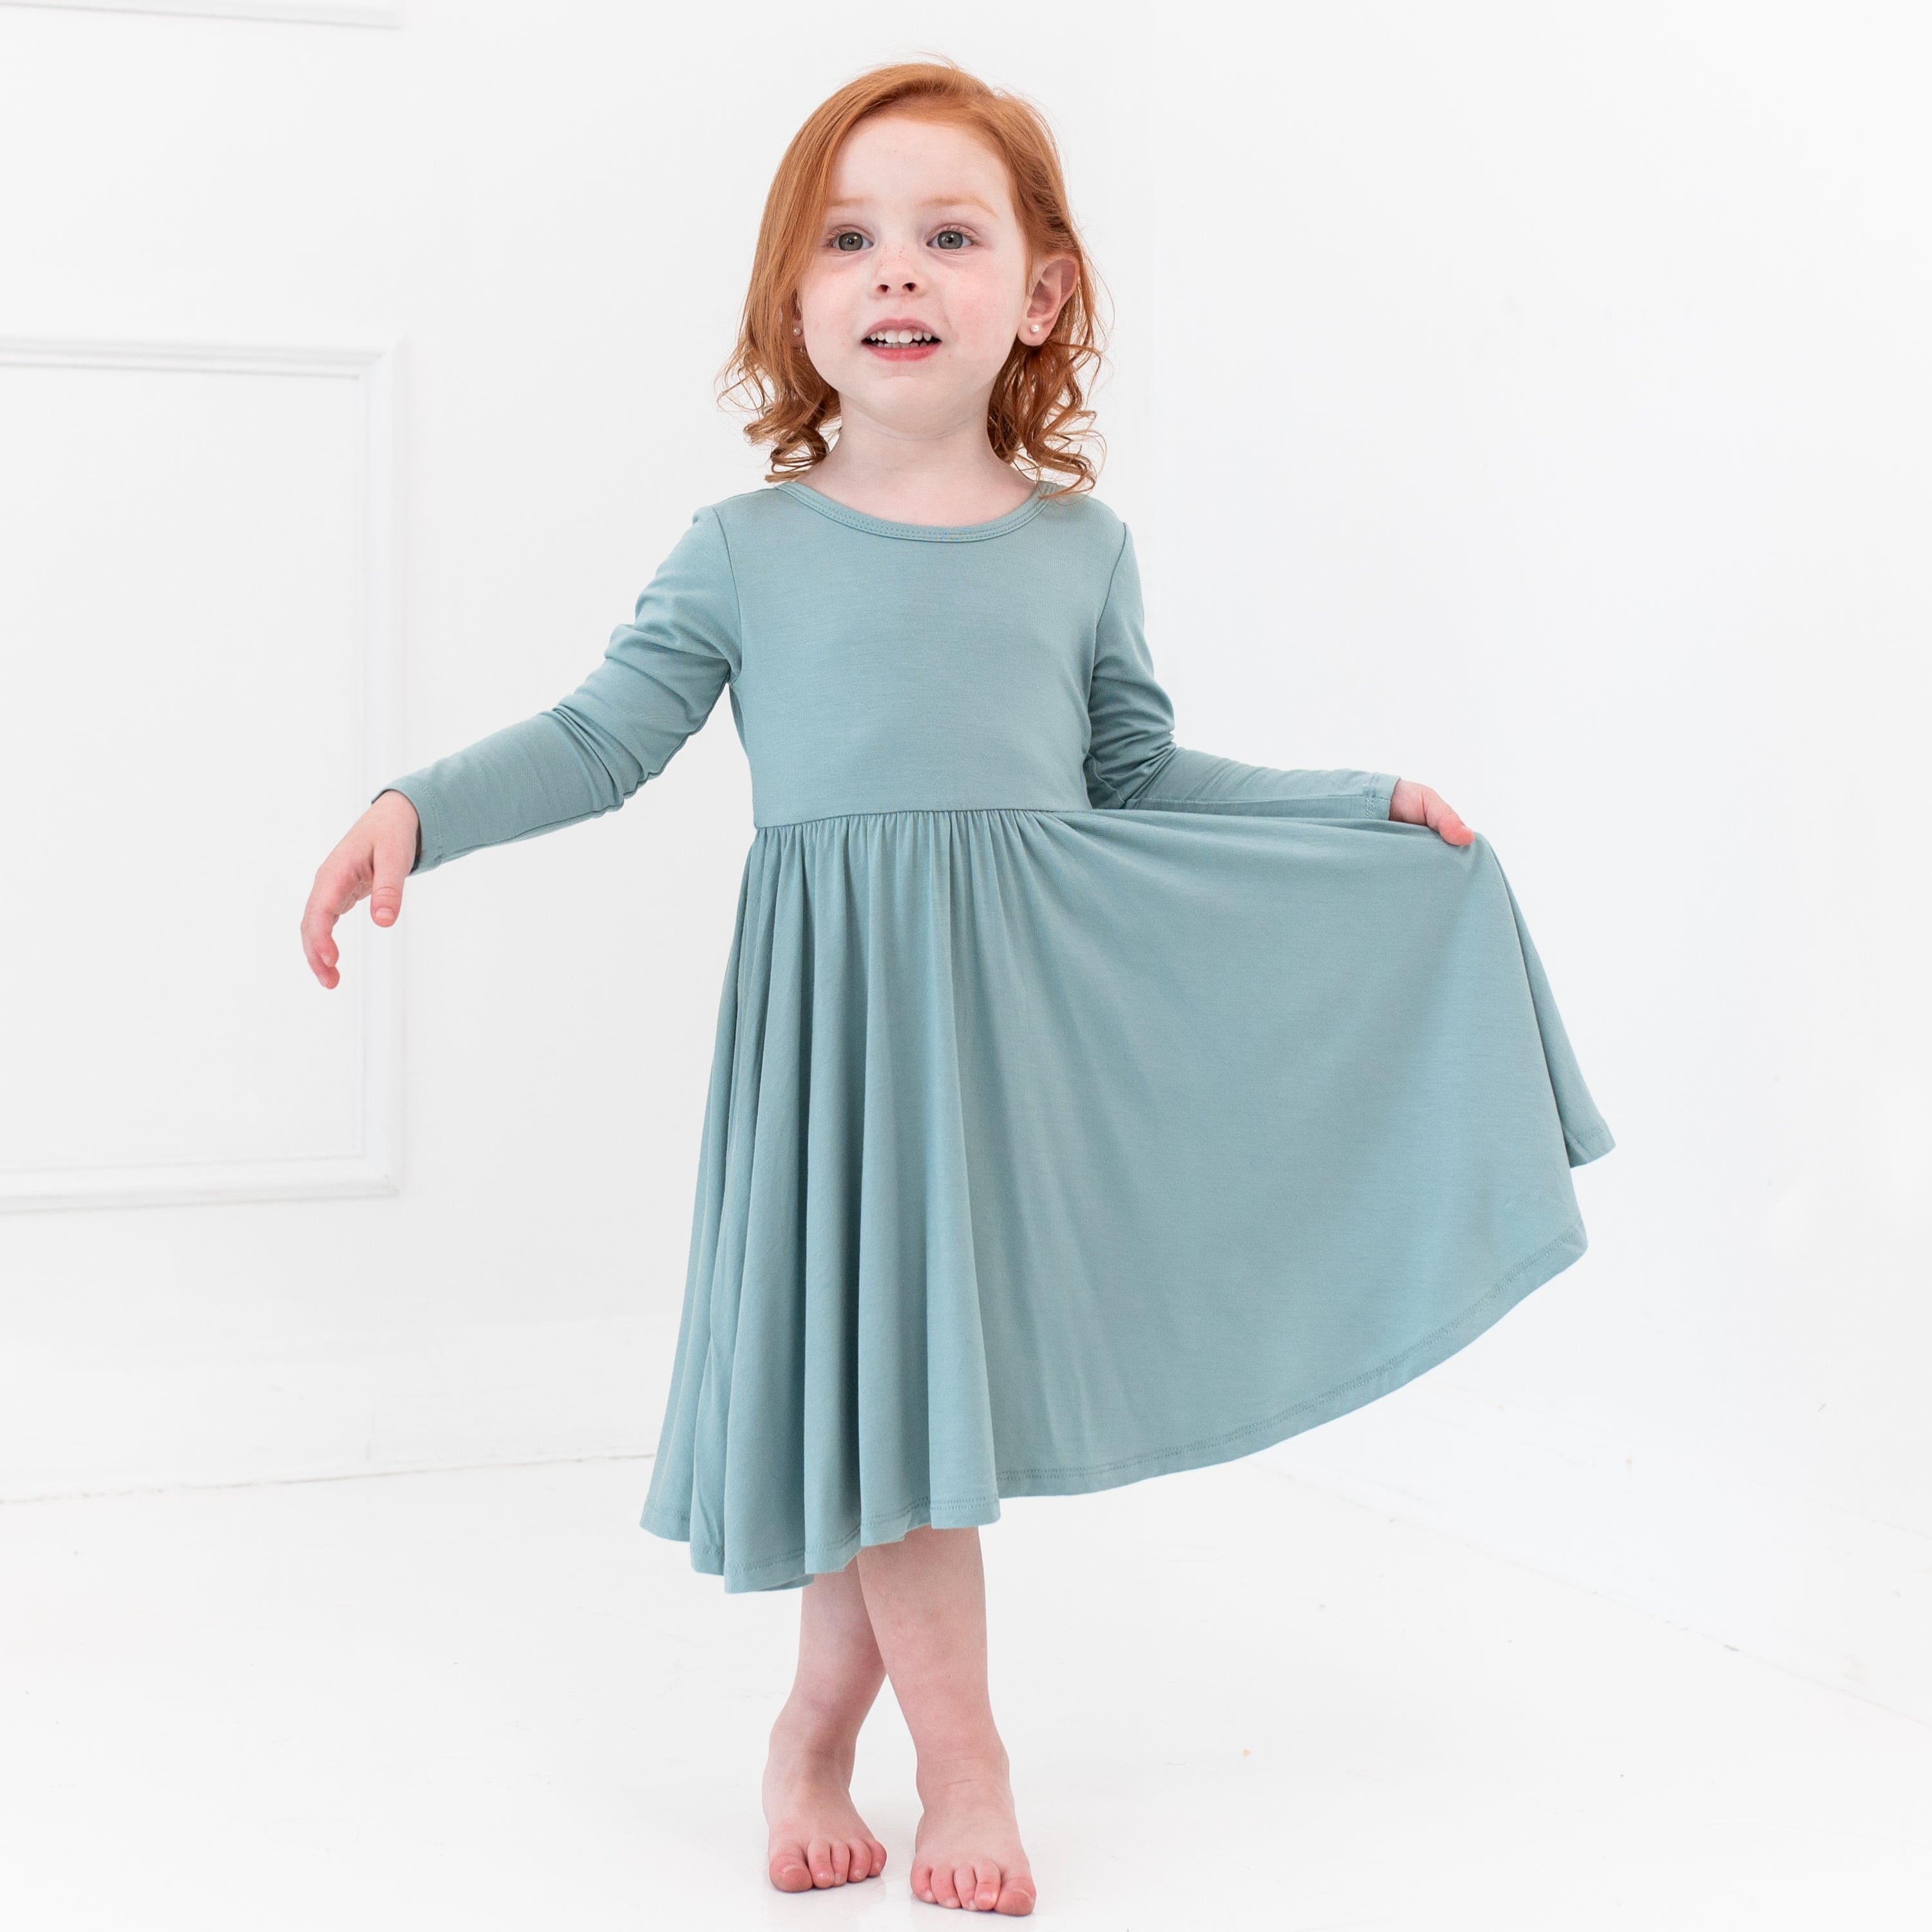  SHOOYING Toddler Girls 2 Pieces Outfits Long Sleeve